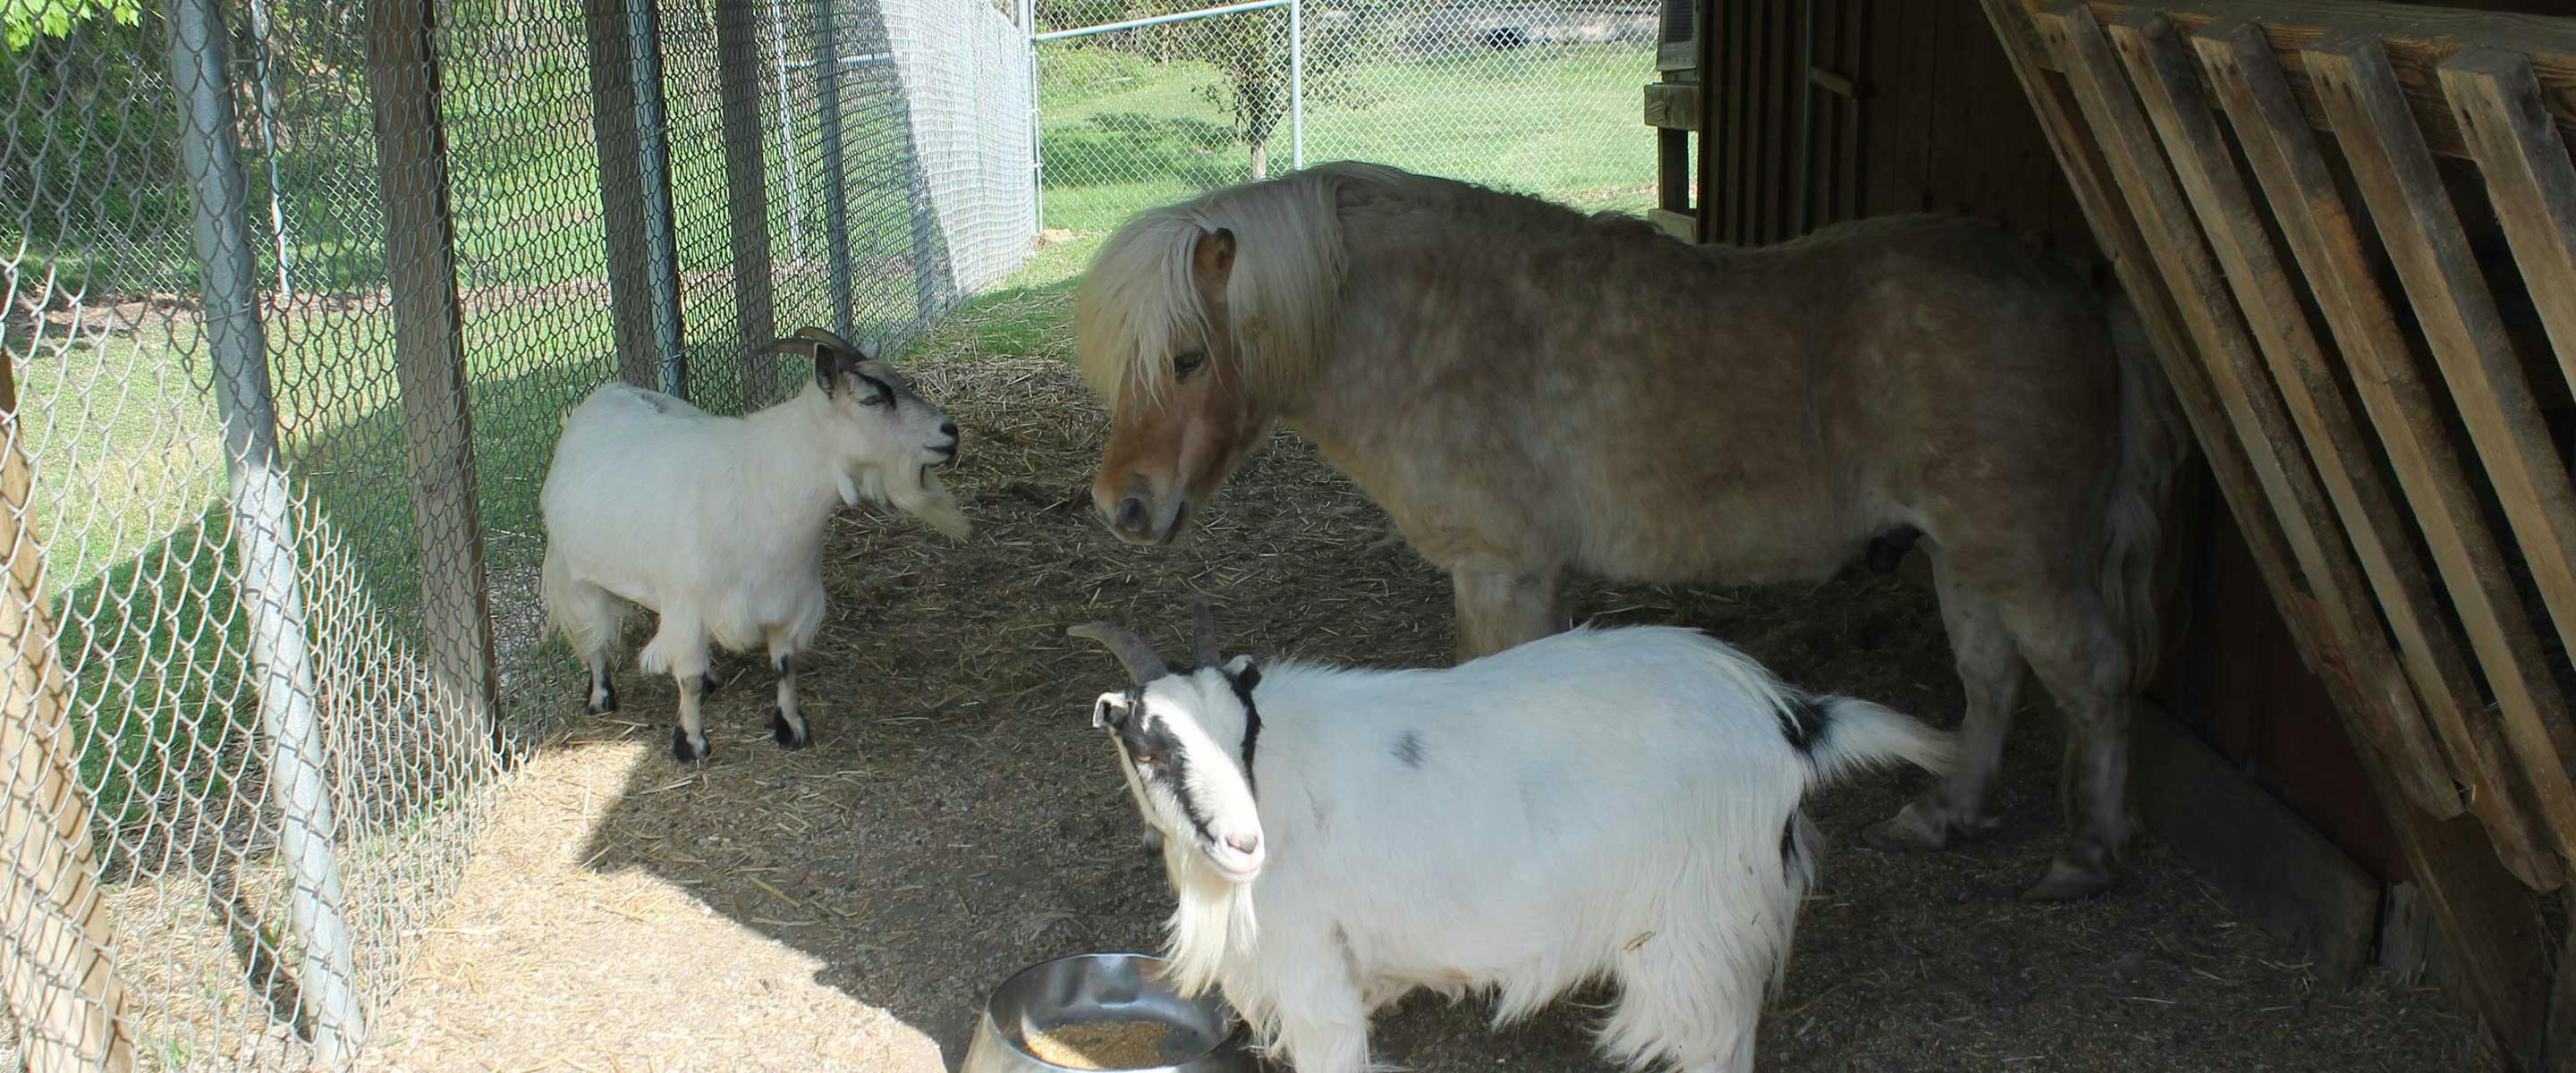 horse, goat, and more for petting at the petting zoo